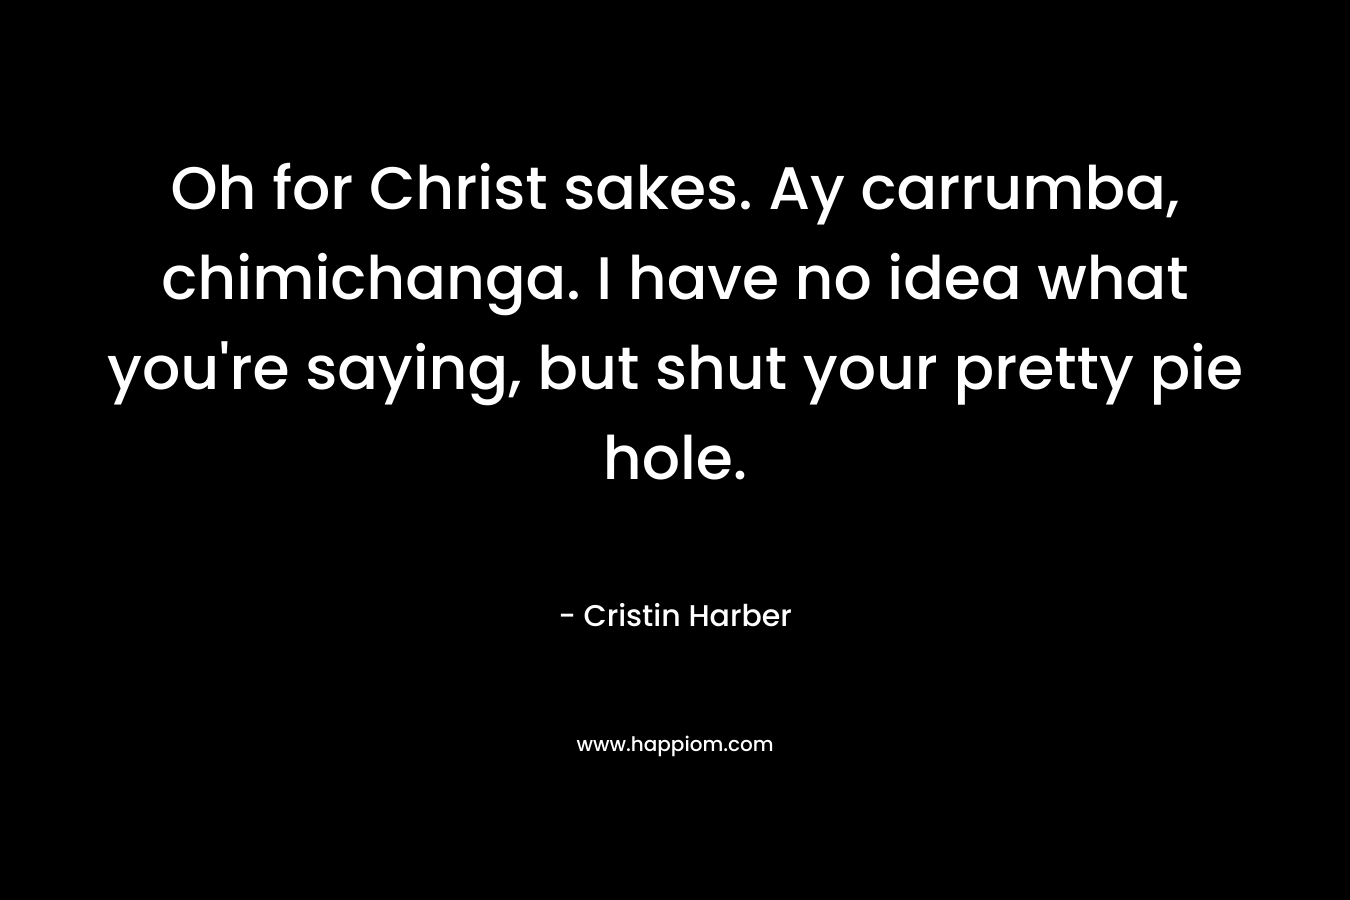 Oh for Christ sakes. Ay carrumba, chimichanga. I have no idea what you're saying, but shut your pretty pie hole.